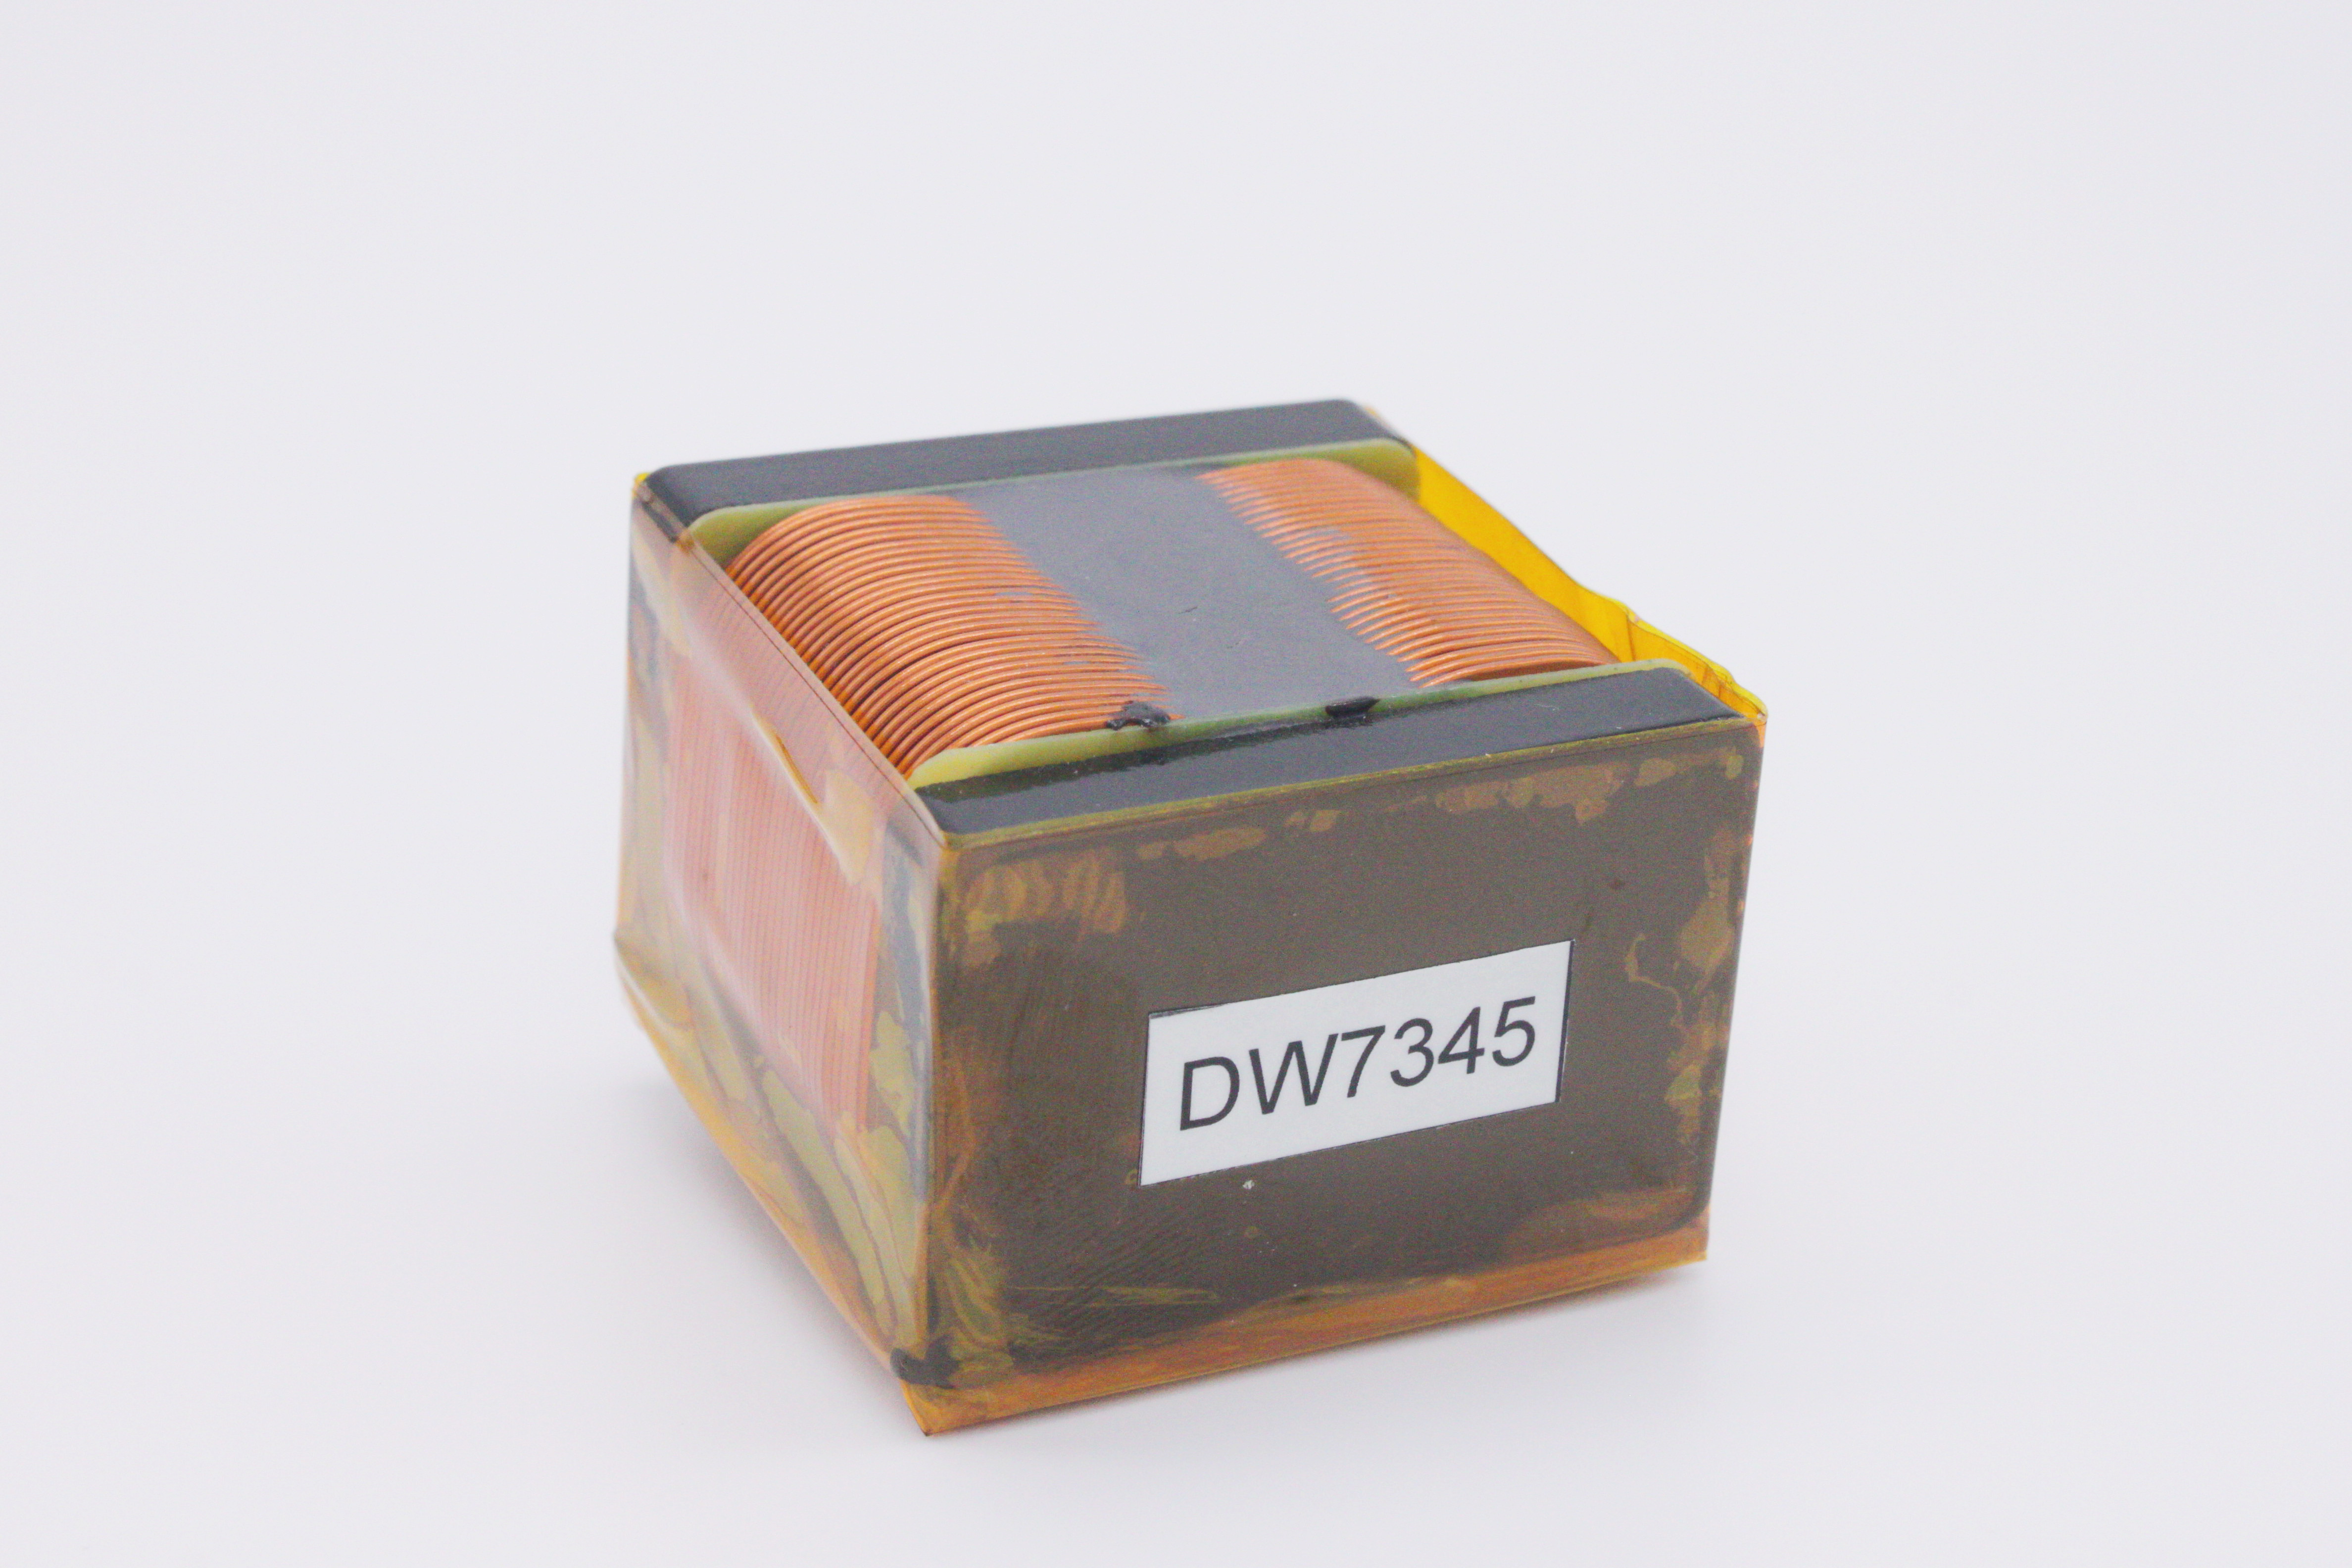 SQ4545 DW7345 DIP Power Inductor 140uH Iron Core Inductor